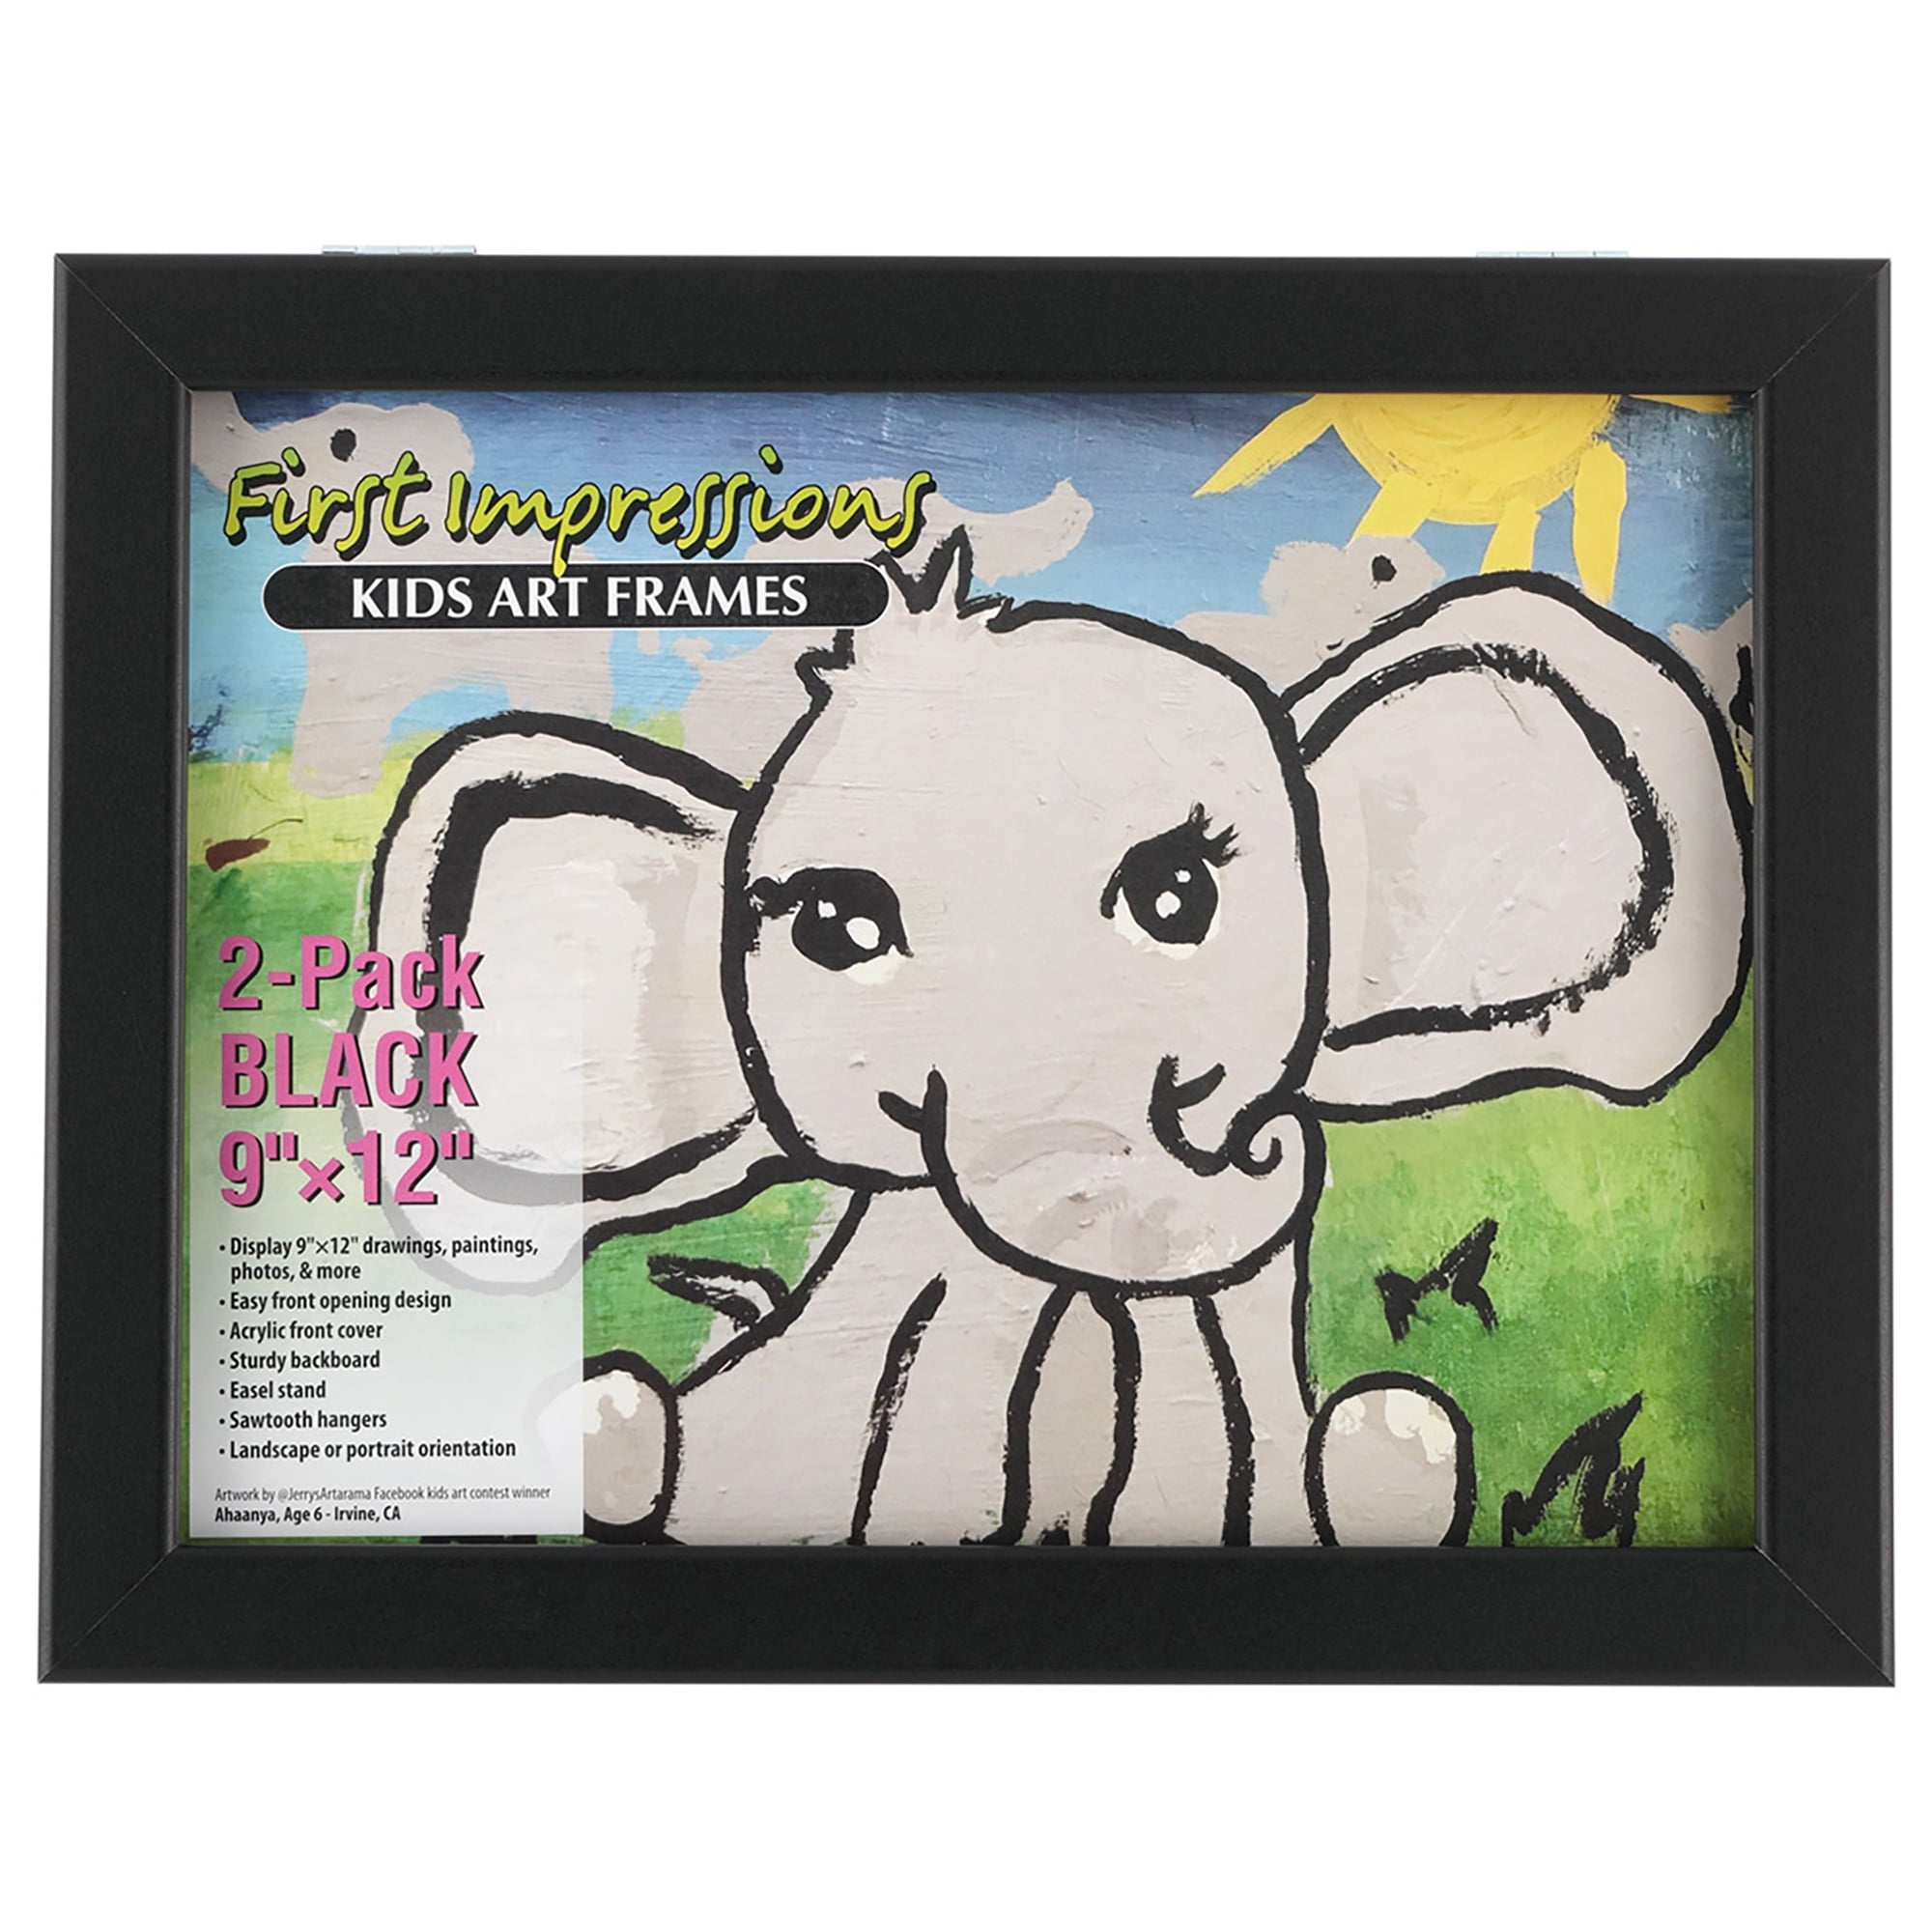  Sank Kids Art Frames 8.5x11 - Front Opening Letter-Size Artwork  Display Storage Frame for Wall, 3D Picture, Crafts, Children Drawing,  Portfolio - Horizontal and Vertical Formats (S-WHITE,1 PACK) : Arts, Crafts